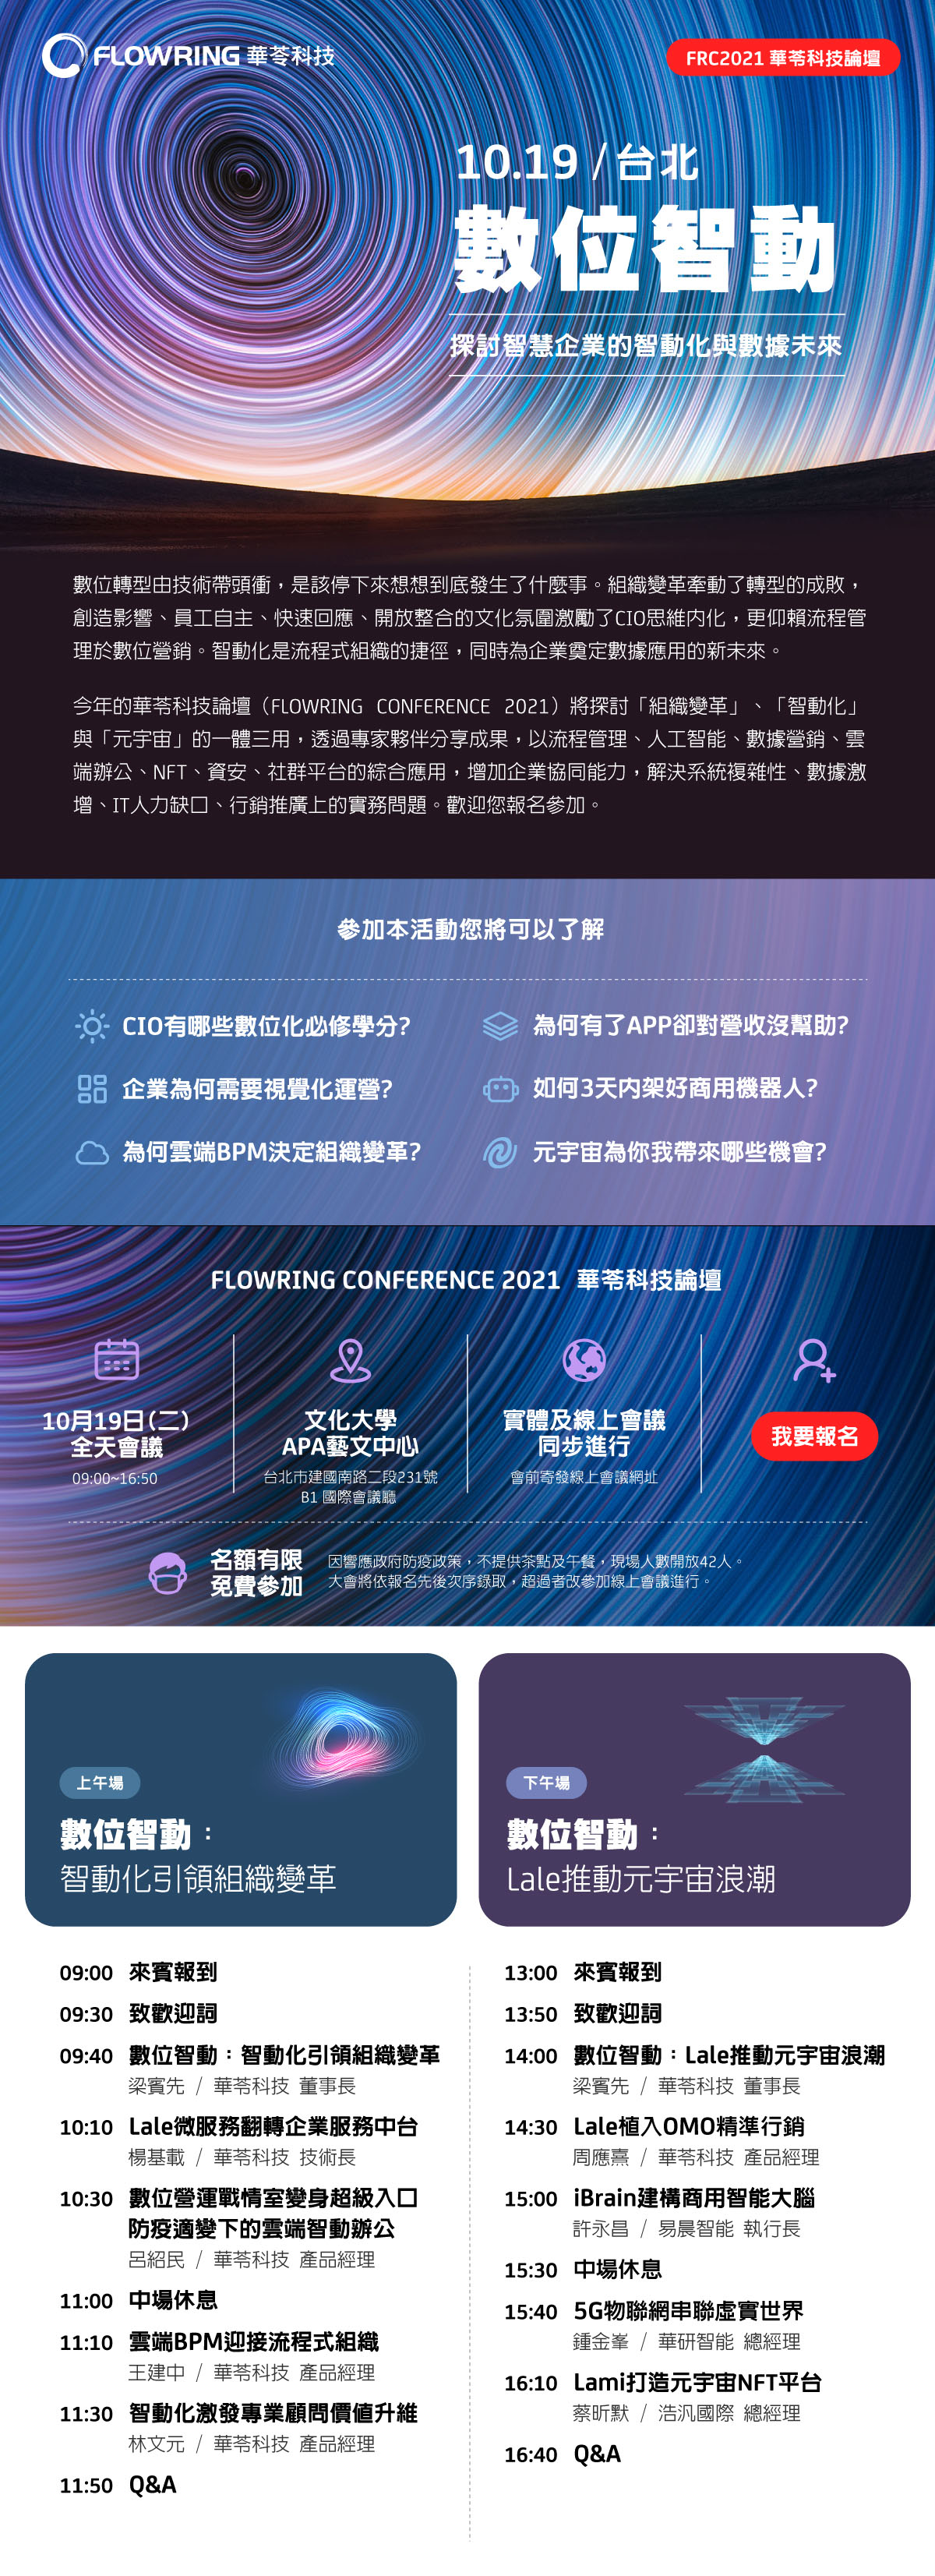 Flowring Conference 2021